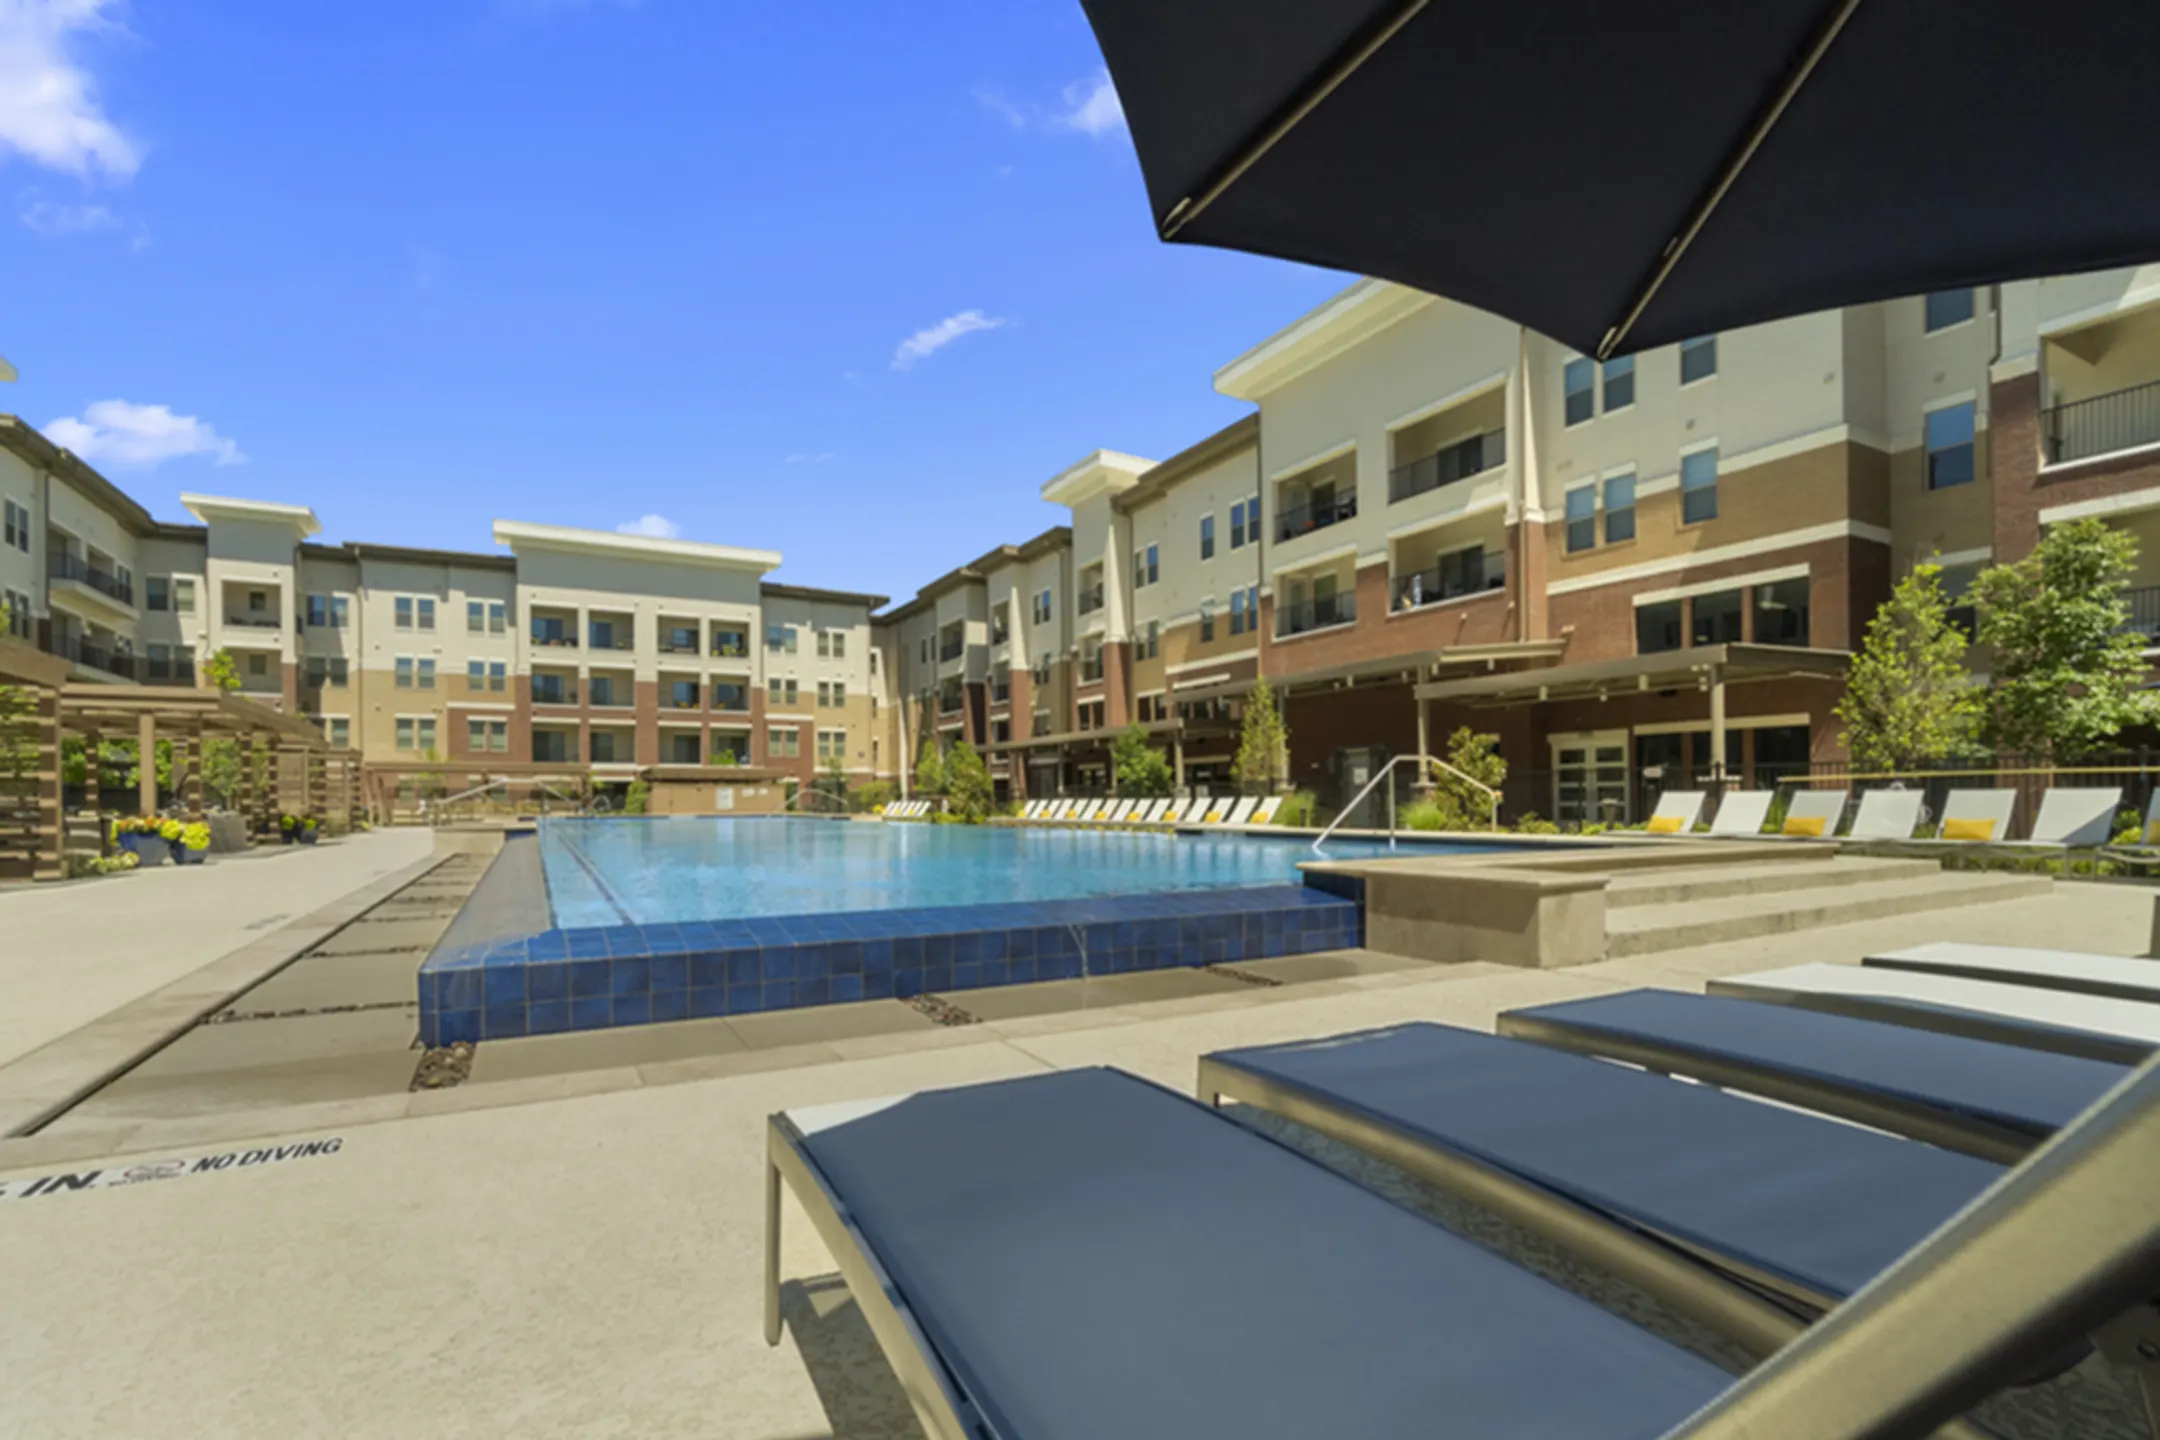 Pool - The Towers at Mercer Crossing - Farmers Branch, TX